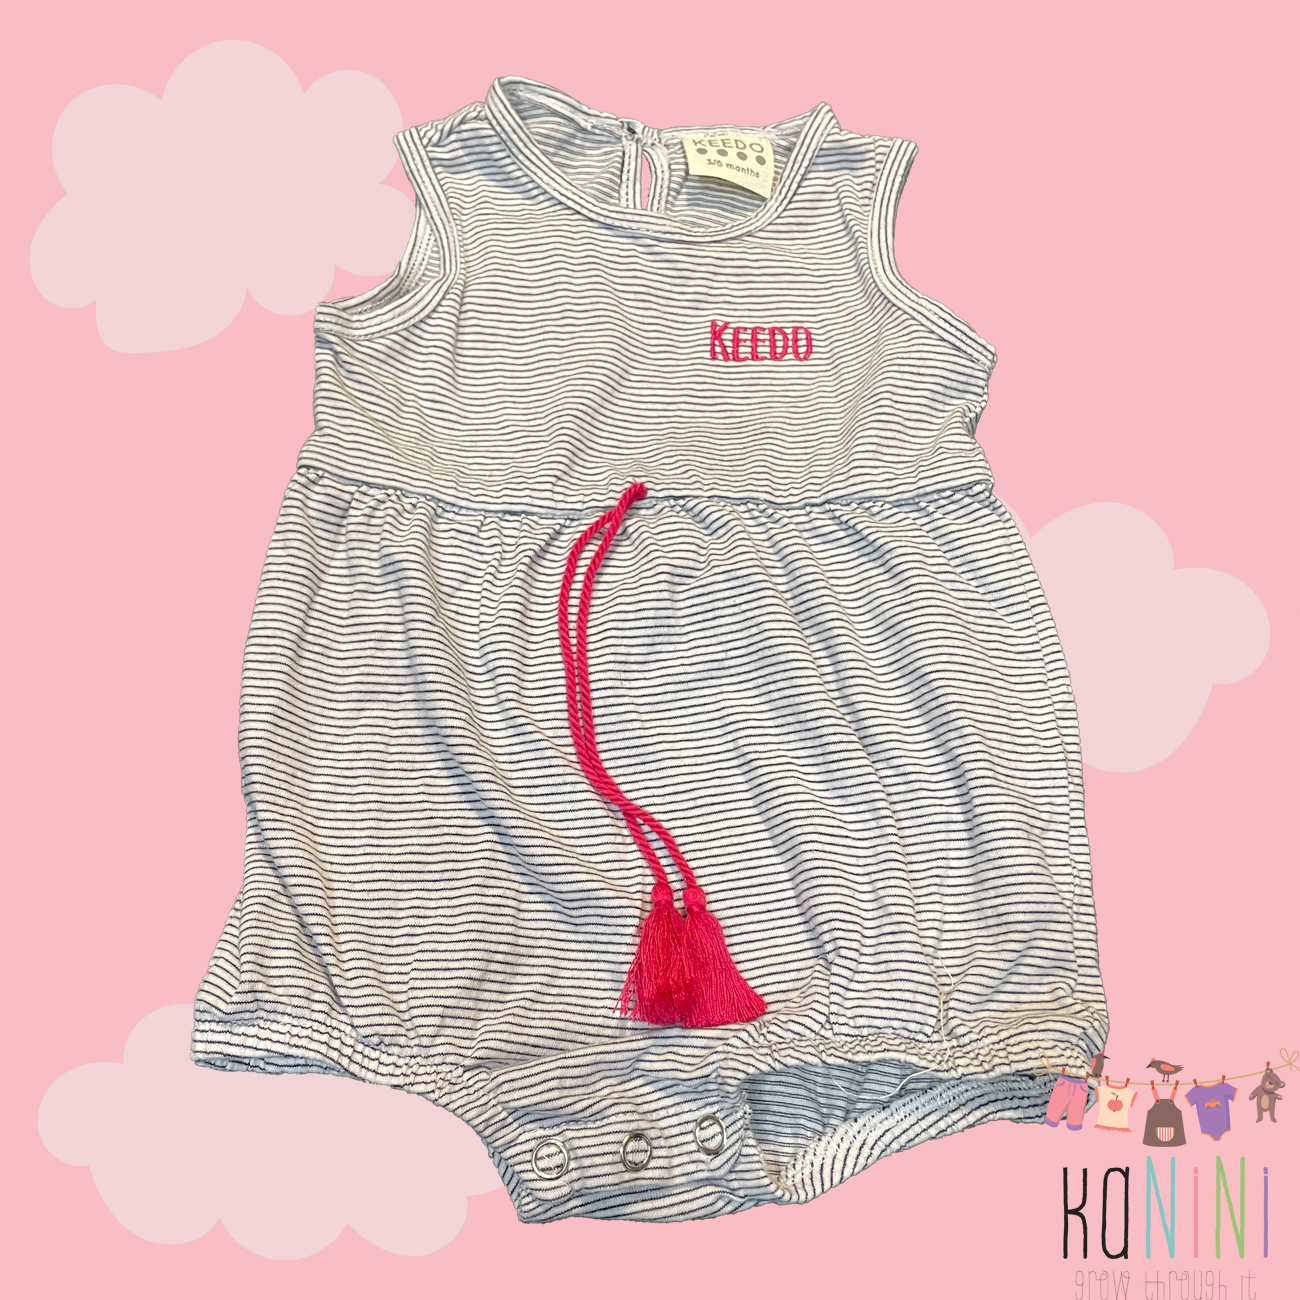 Featured image for “Keedo 3 - 6 Months Girls Striped Romper”